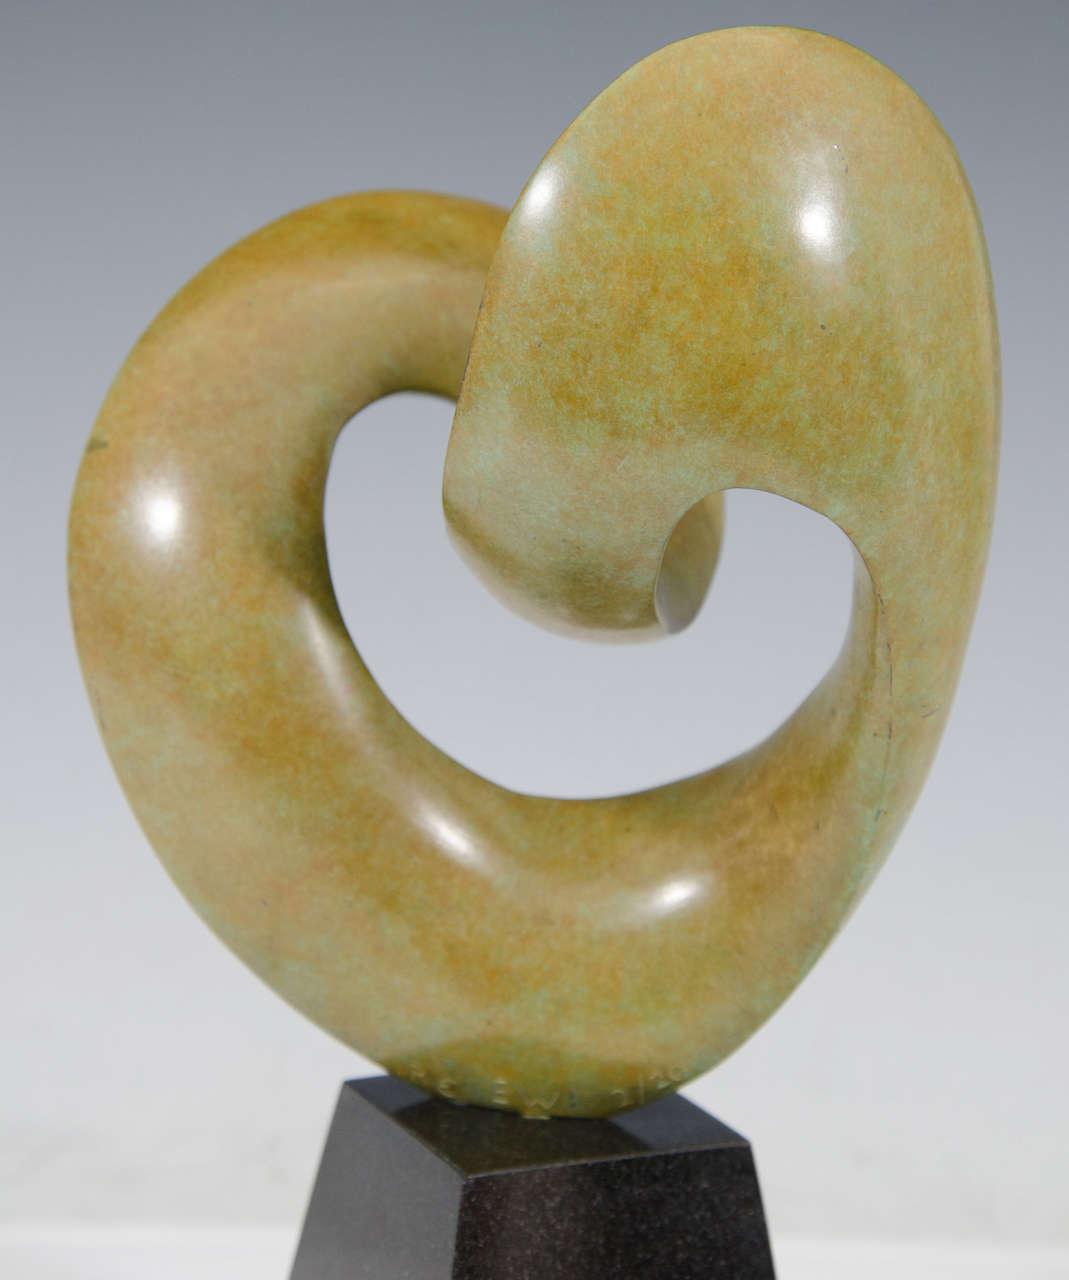 Contemporary Abstract Bronze Sculpture by Richard Erdman Awarded to Dr. Kathryn W. Davis